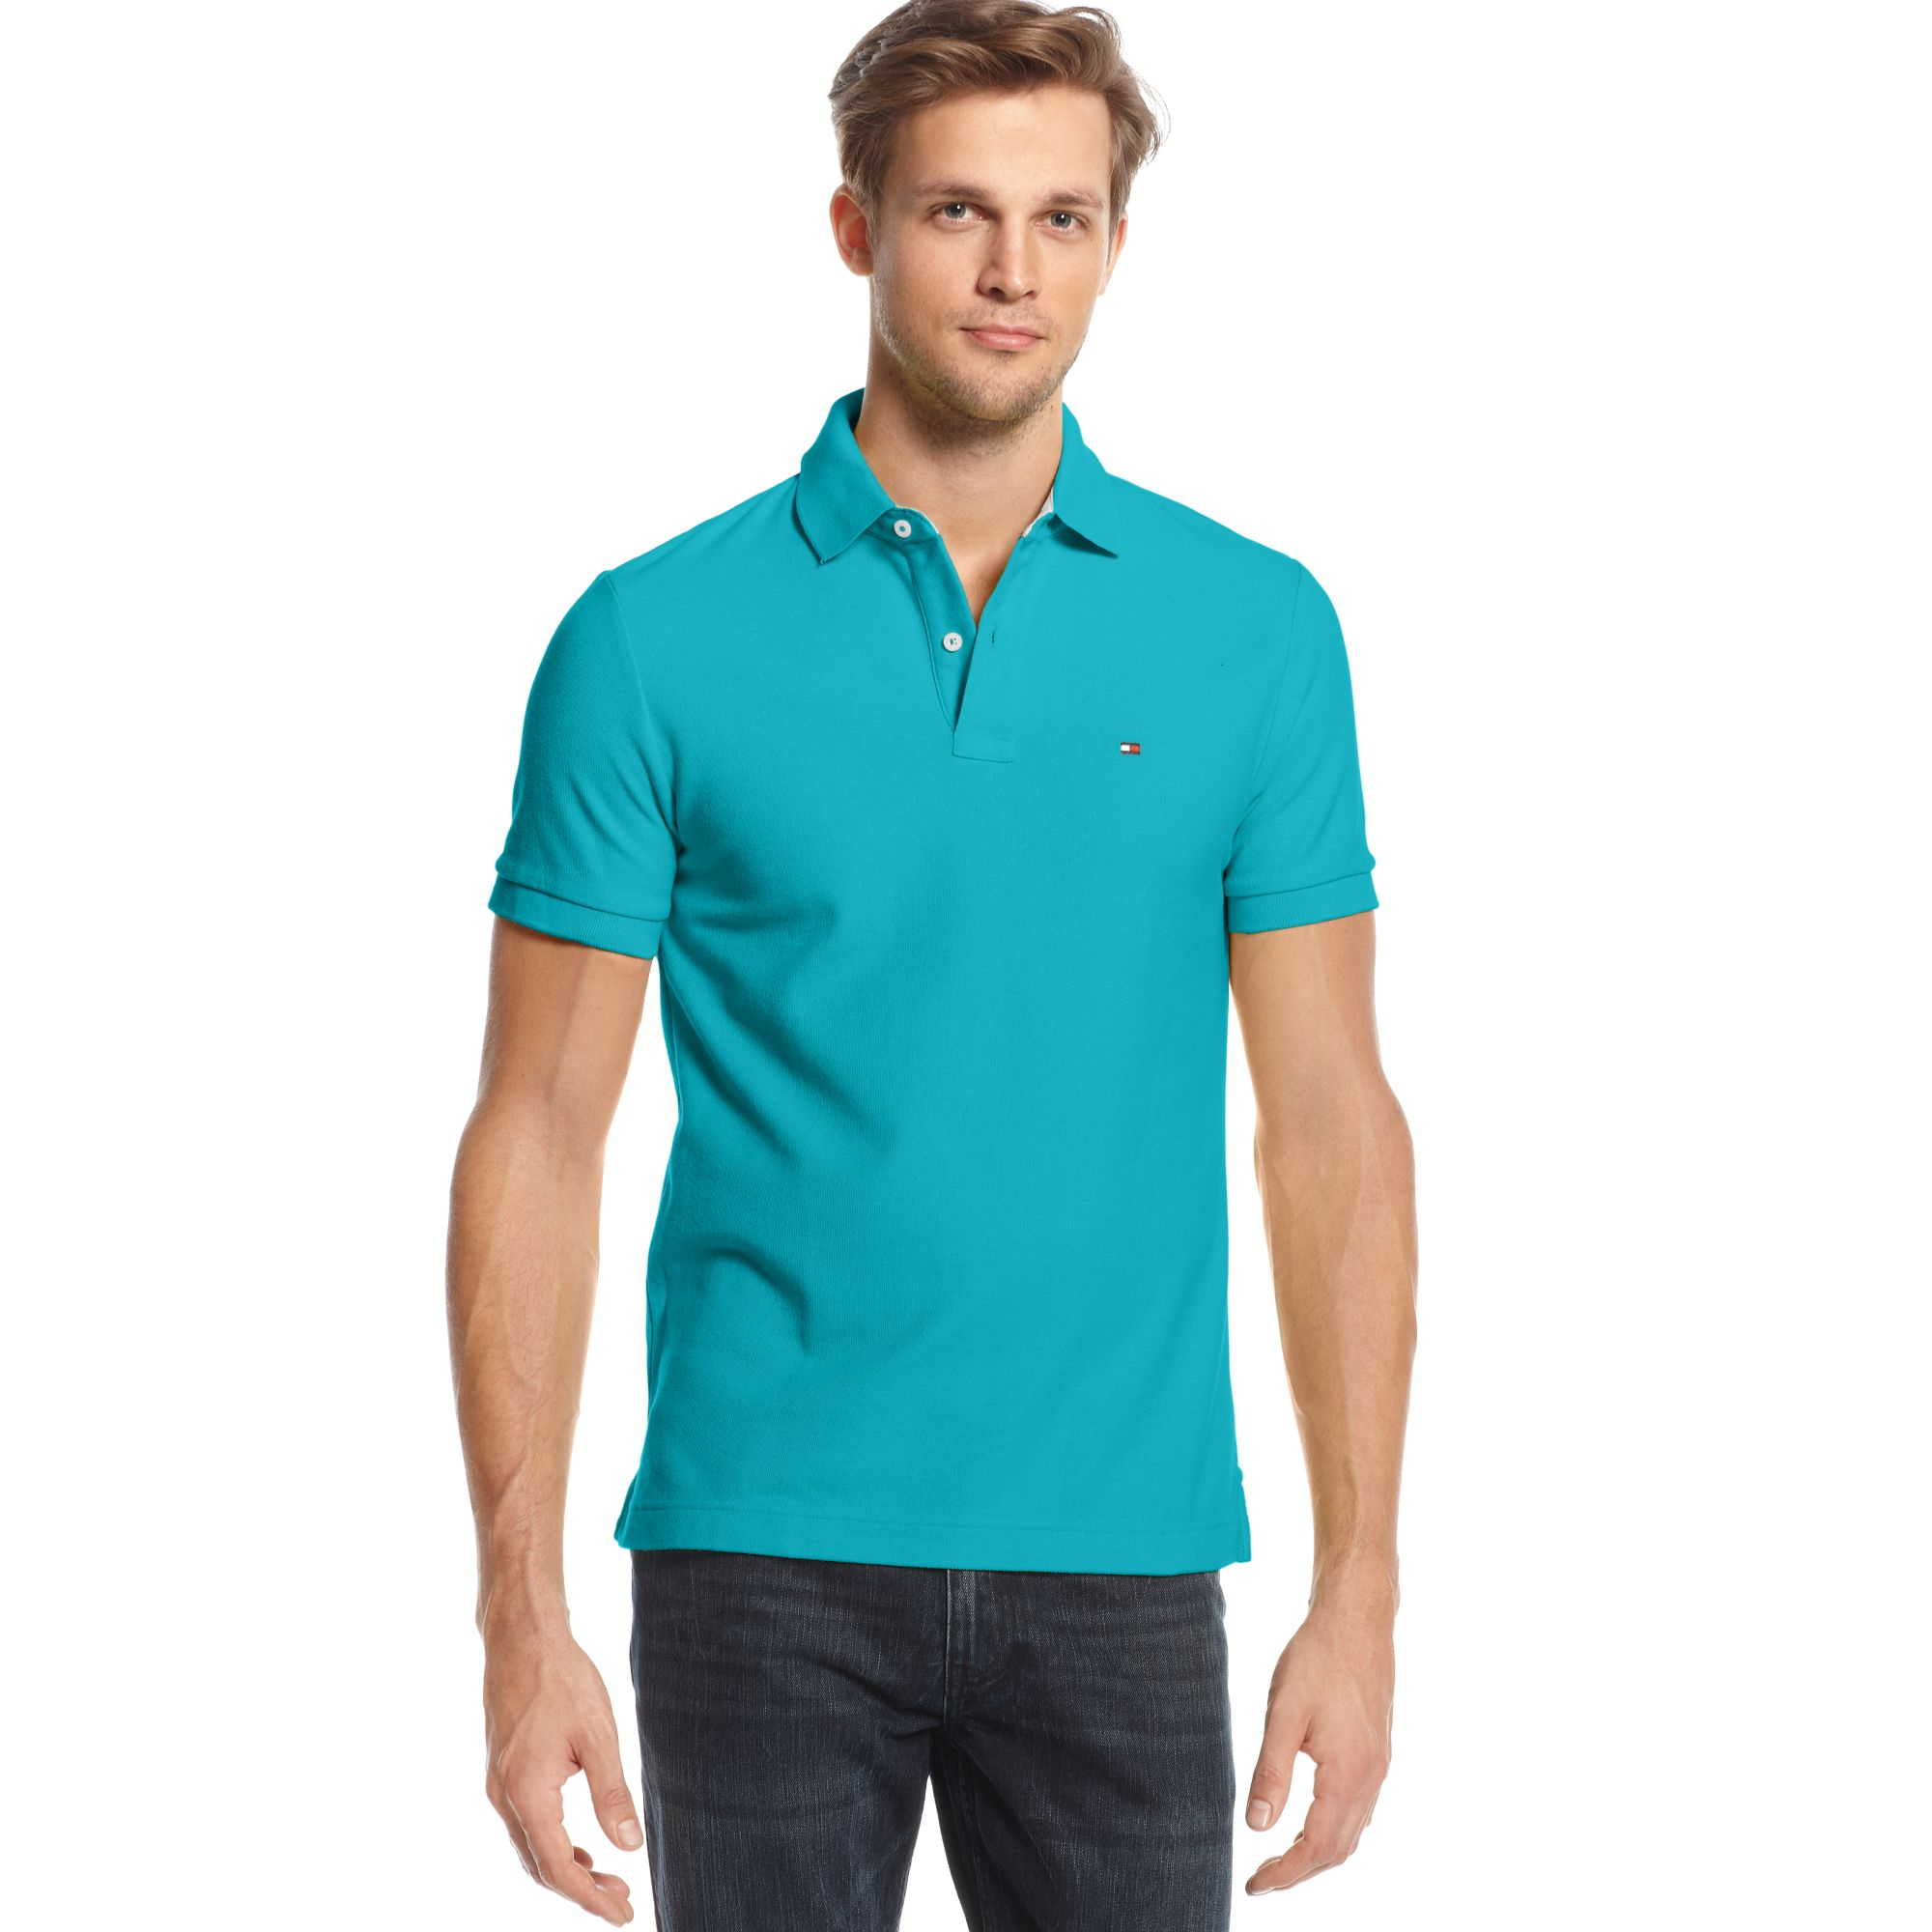 Lyst - Tommy Hilfiger Slim Fit Ivy Polo in Blue for Men